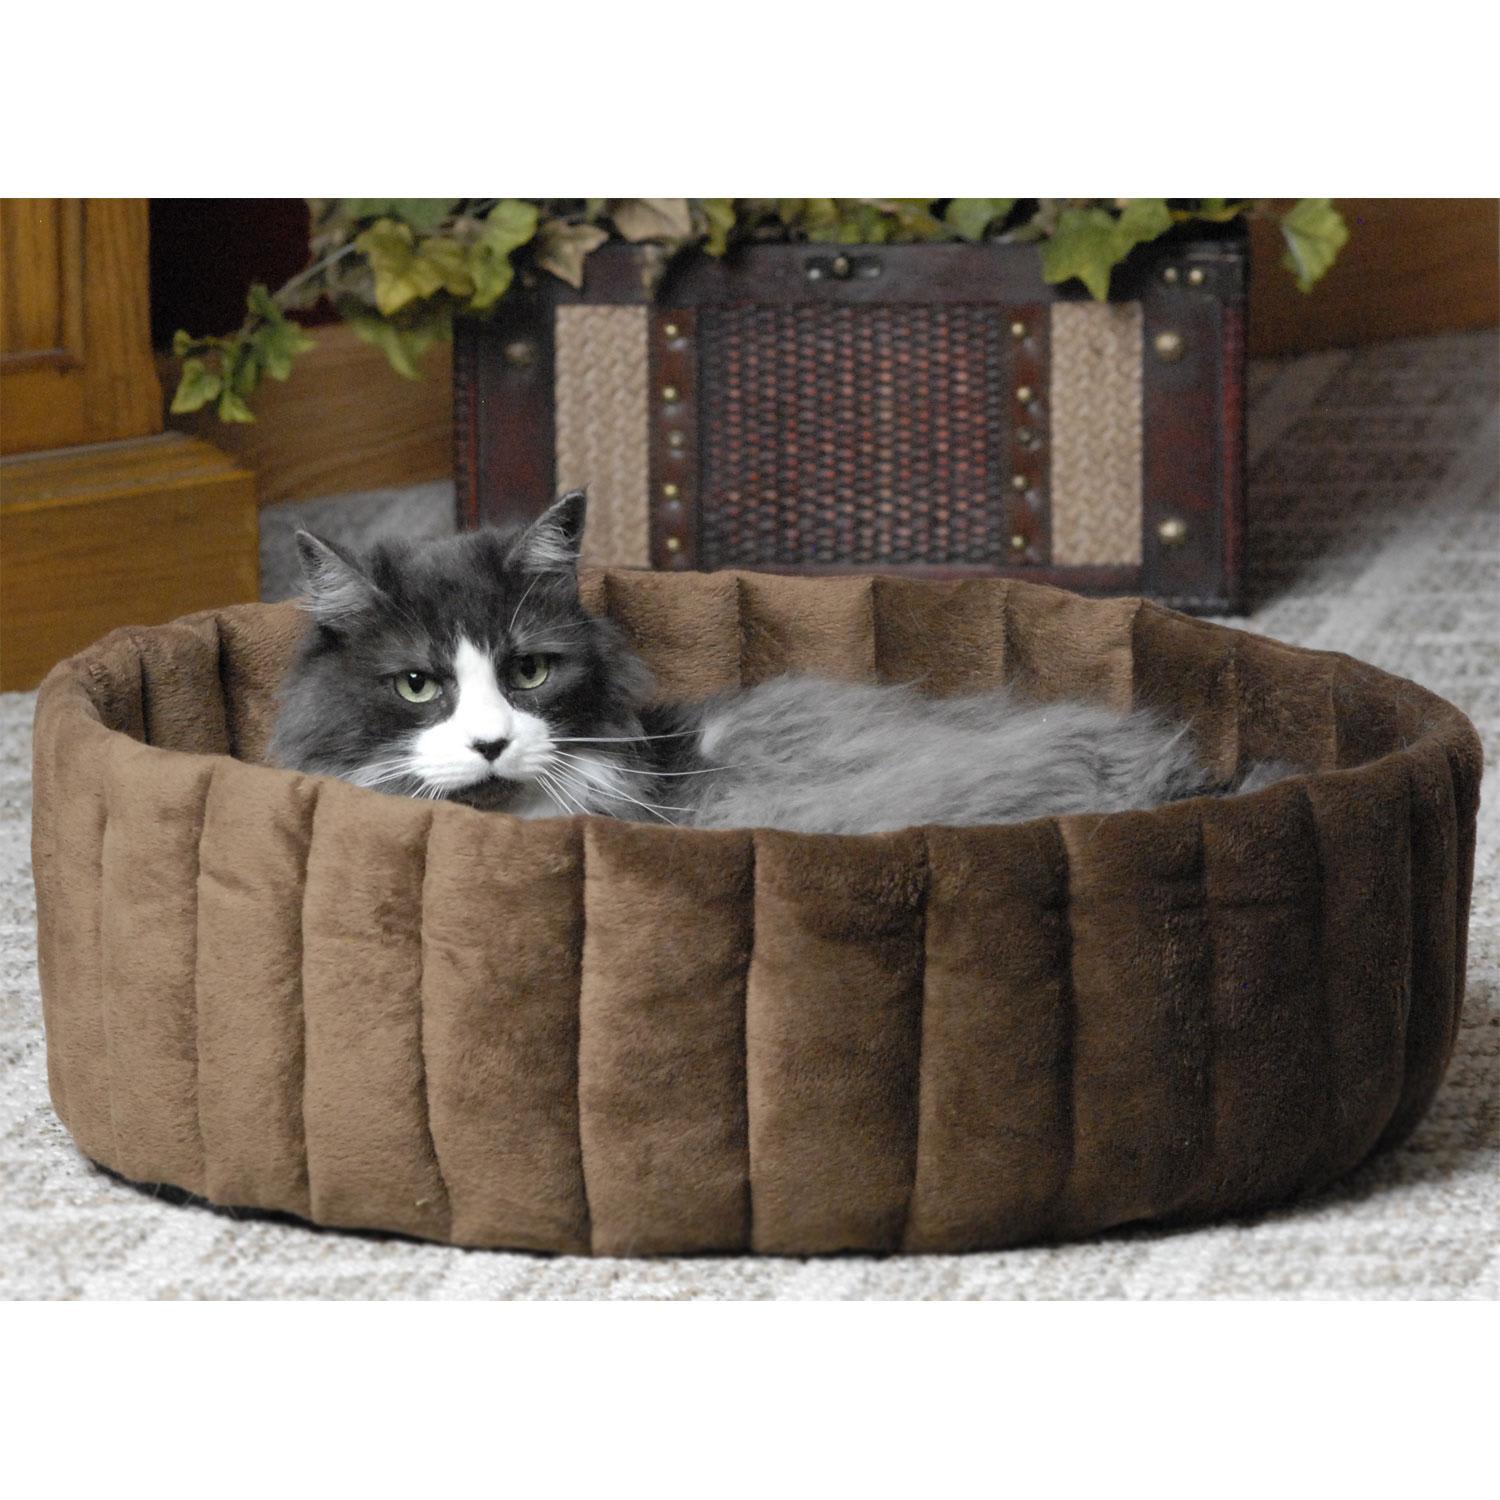 Photos - Bed & Furniture K&H Kitty Cup Tan & Mocha Cat Bed, 16" L x 16" W, Small, Brown / Tan 1 